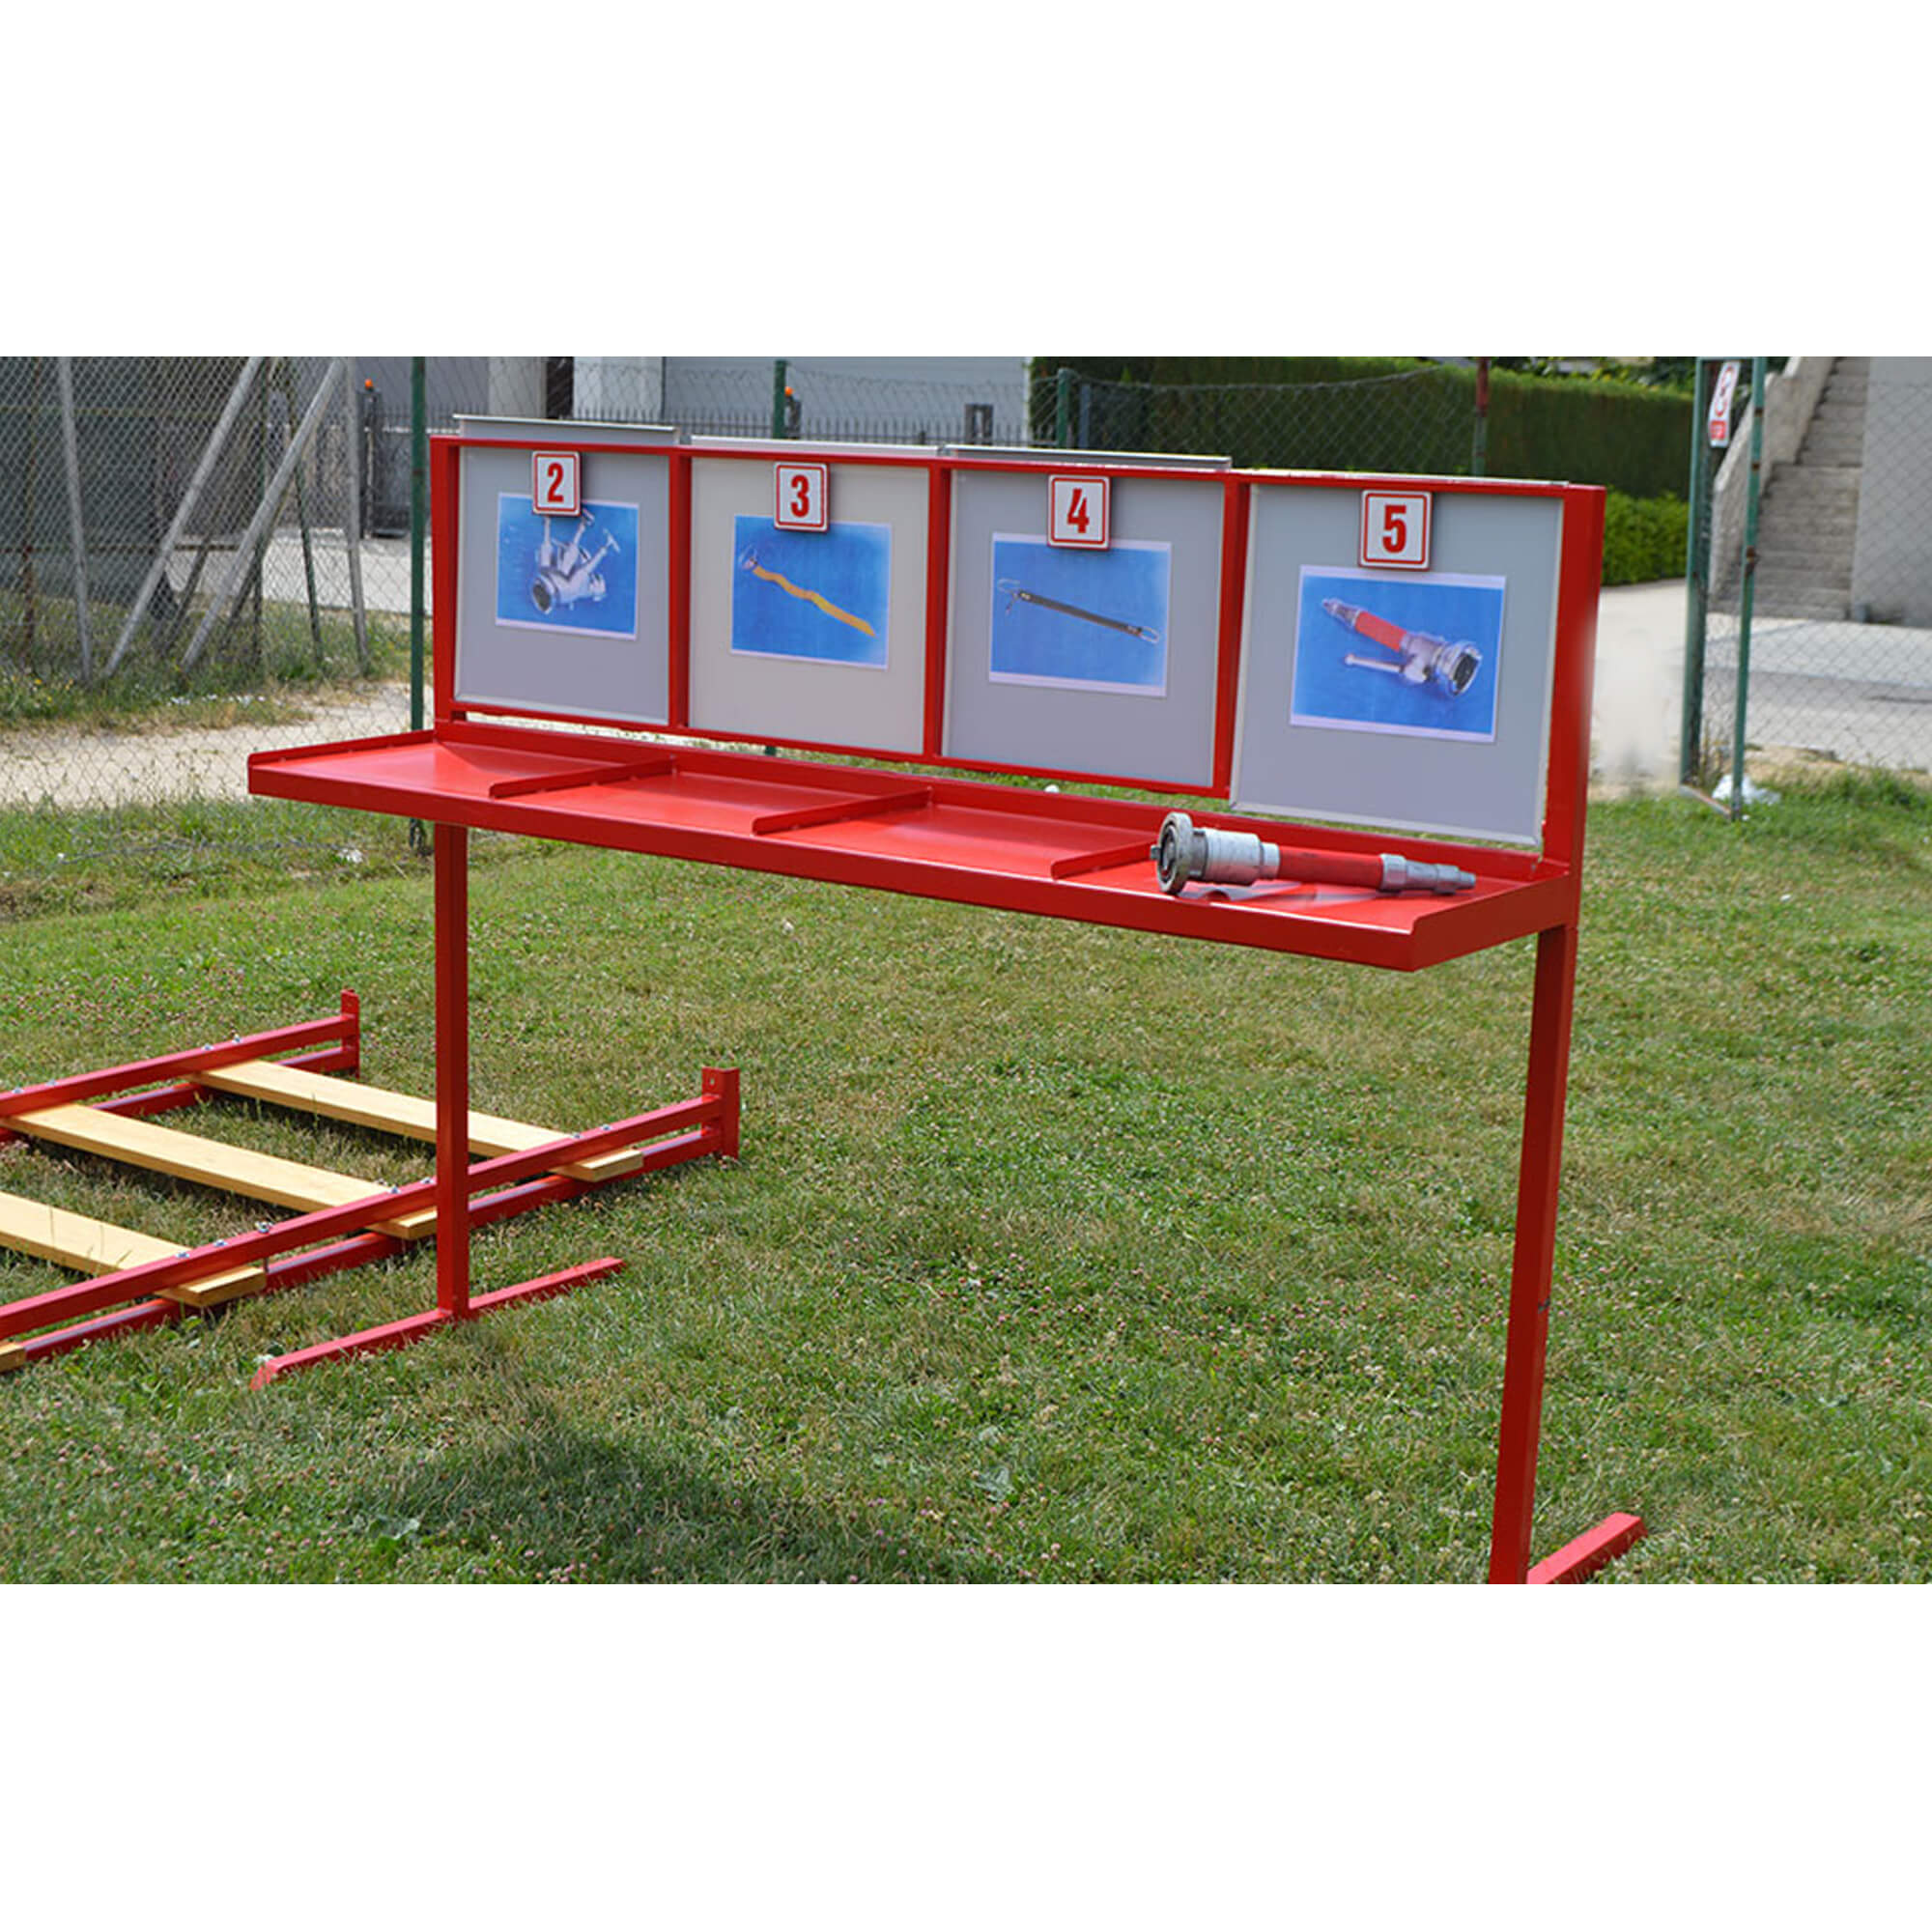 Equipment Stand with pictures and numbers